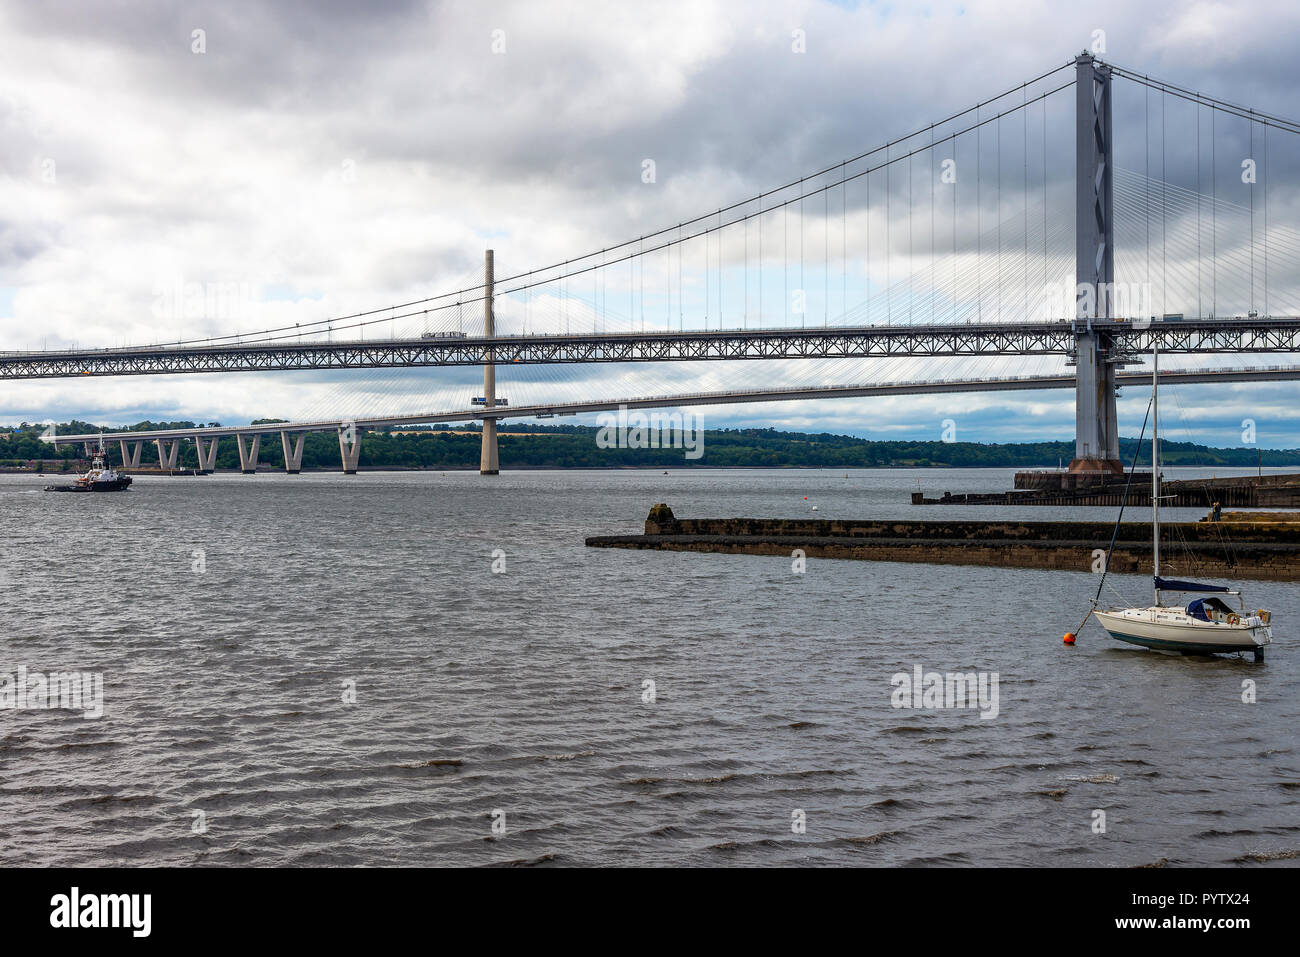 The Old and New Forth Road Bridges from North Queensferry Crossing the Firth of Forth near Edinburgh Scotland United Kingdom UK Stock Photo